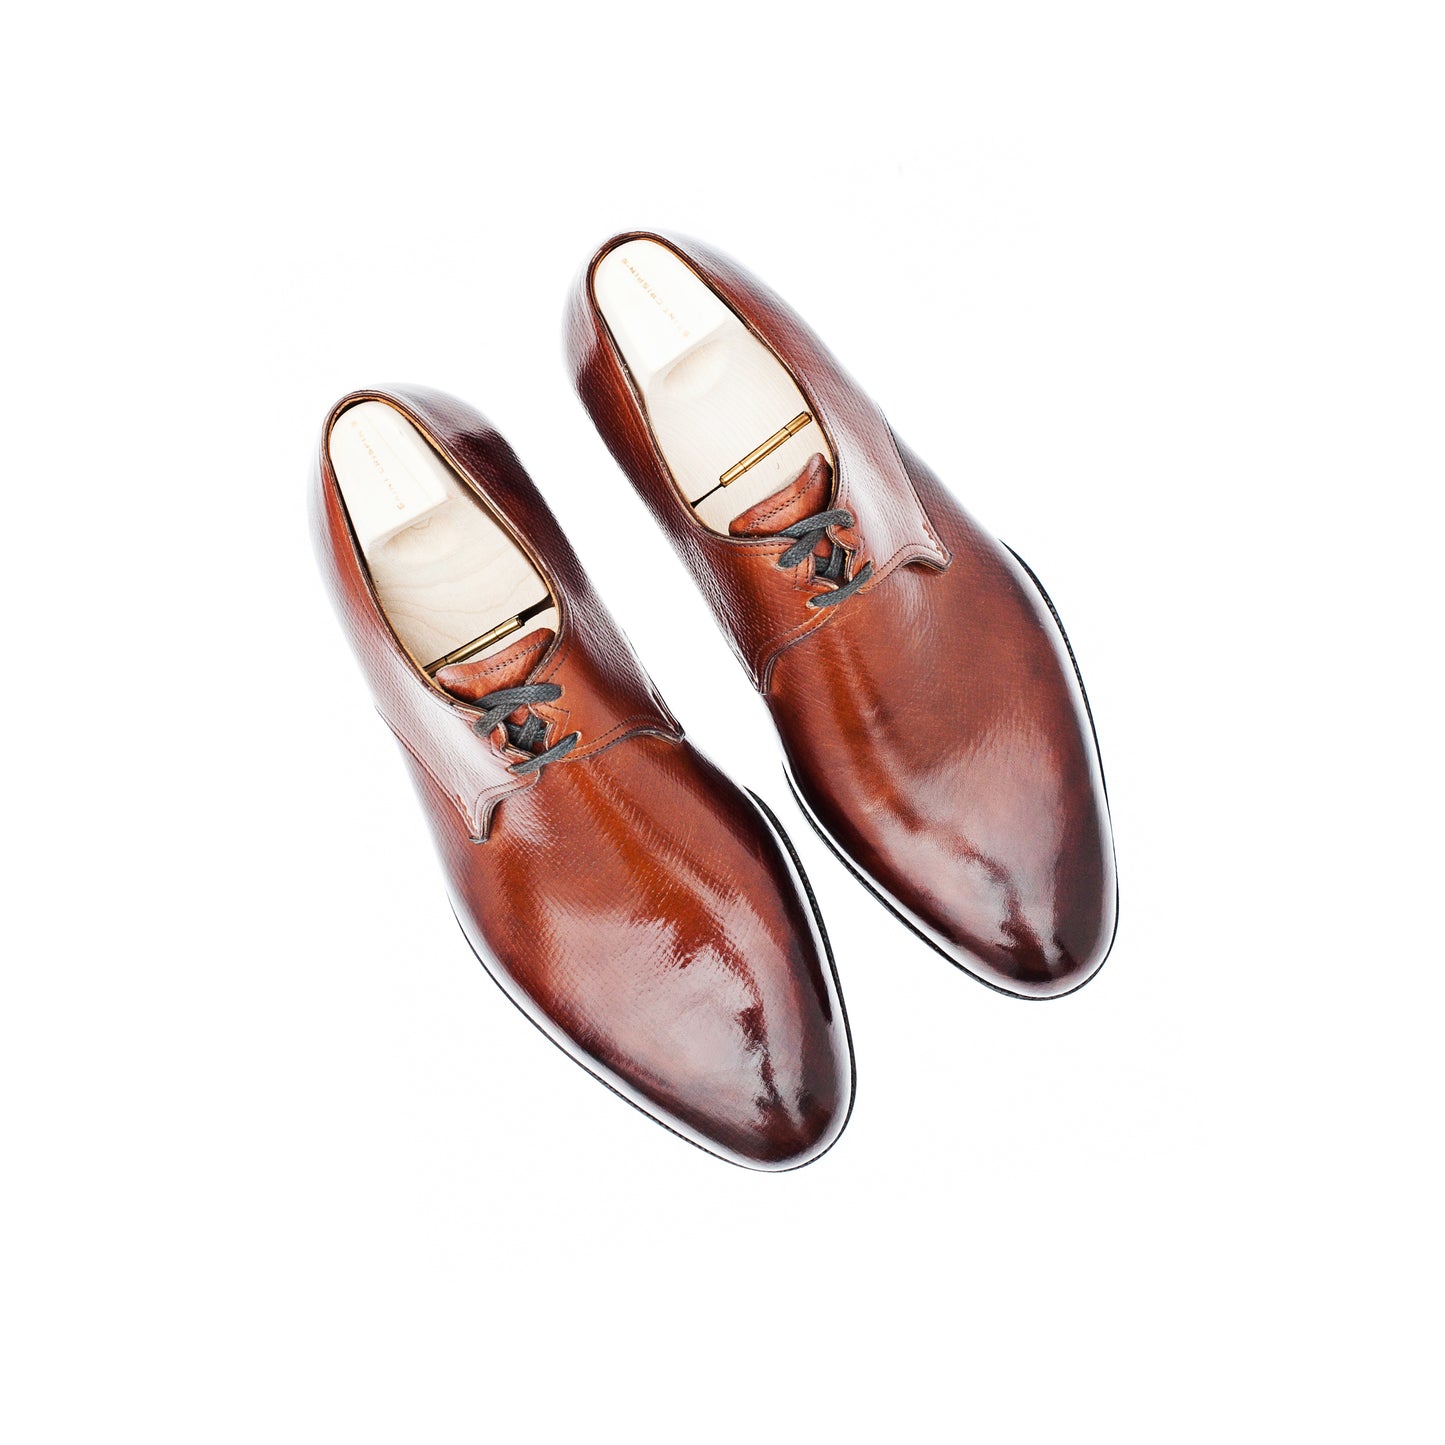 Two eyelet Derby in mid brown Russian calf leather